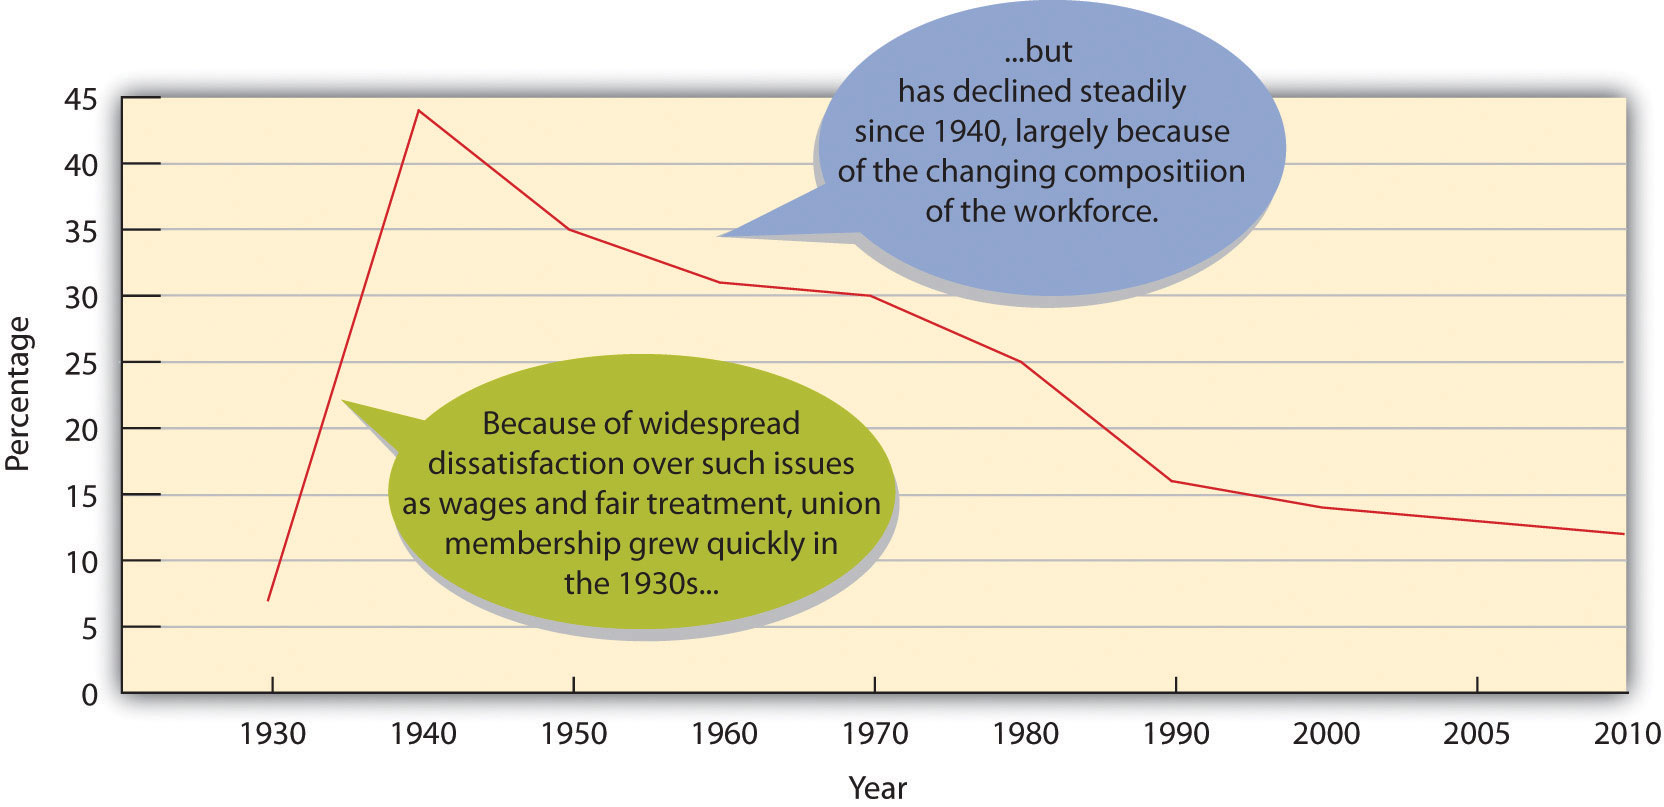 Labor Union Density, 1930-2010: Because of widespread dissatisfaction over such issues as wages and fair treatment, union membership grew quickly in the 1930s...but has declined steadily since 1940, largely because of the changing composition of the workforce.